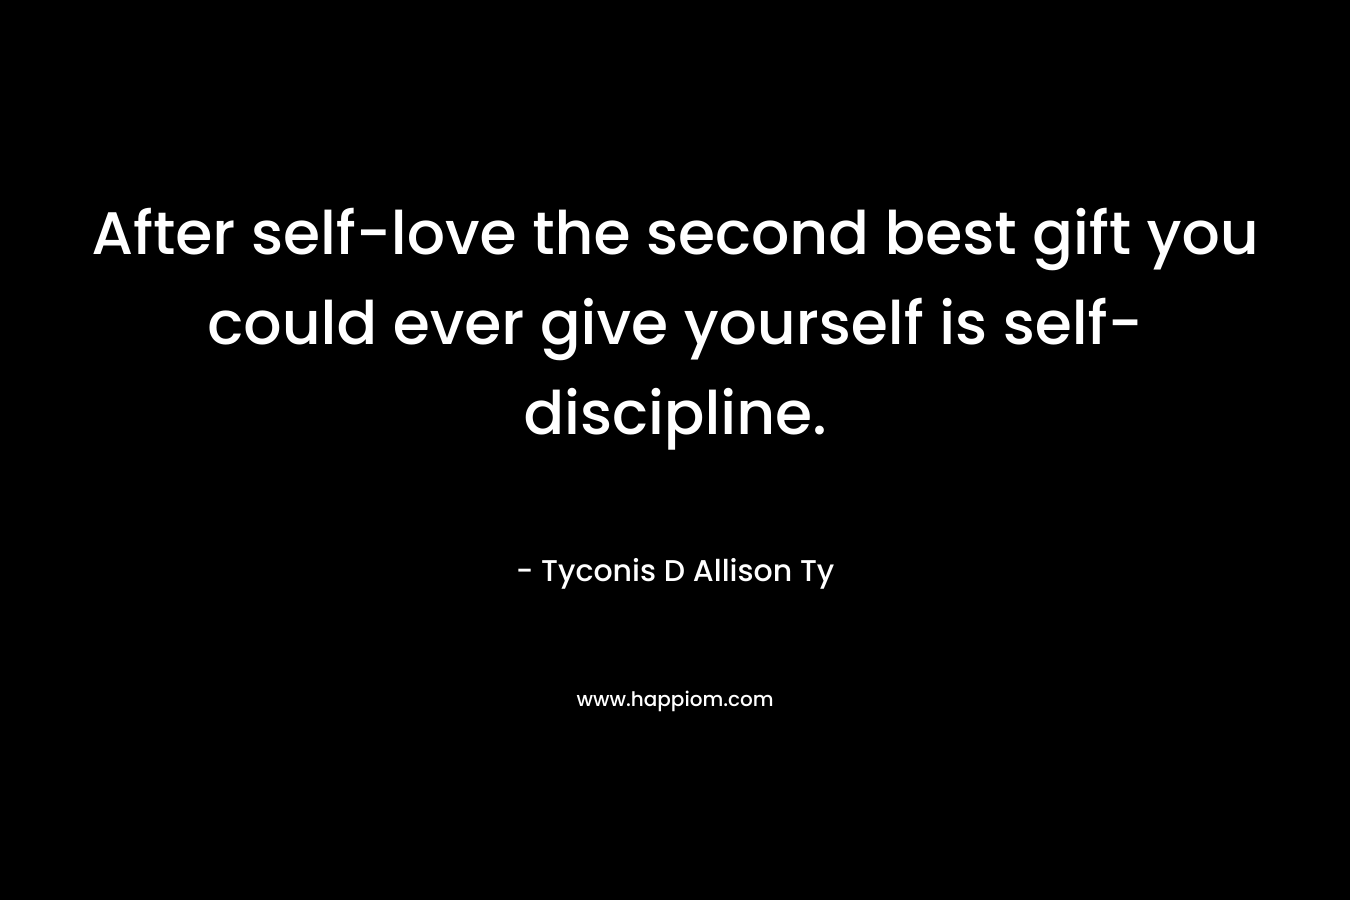 After self-love the second best gift you could ever give yourself is self-discipline. – Tyconis D Allison Ty